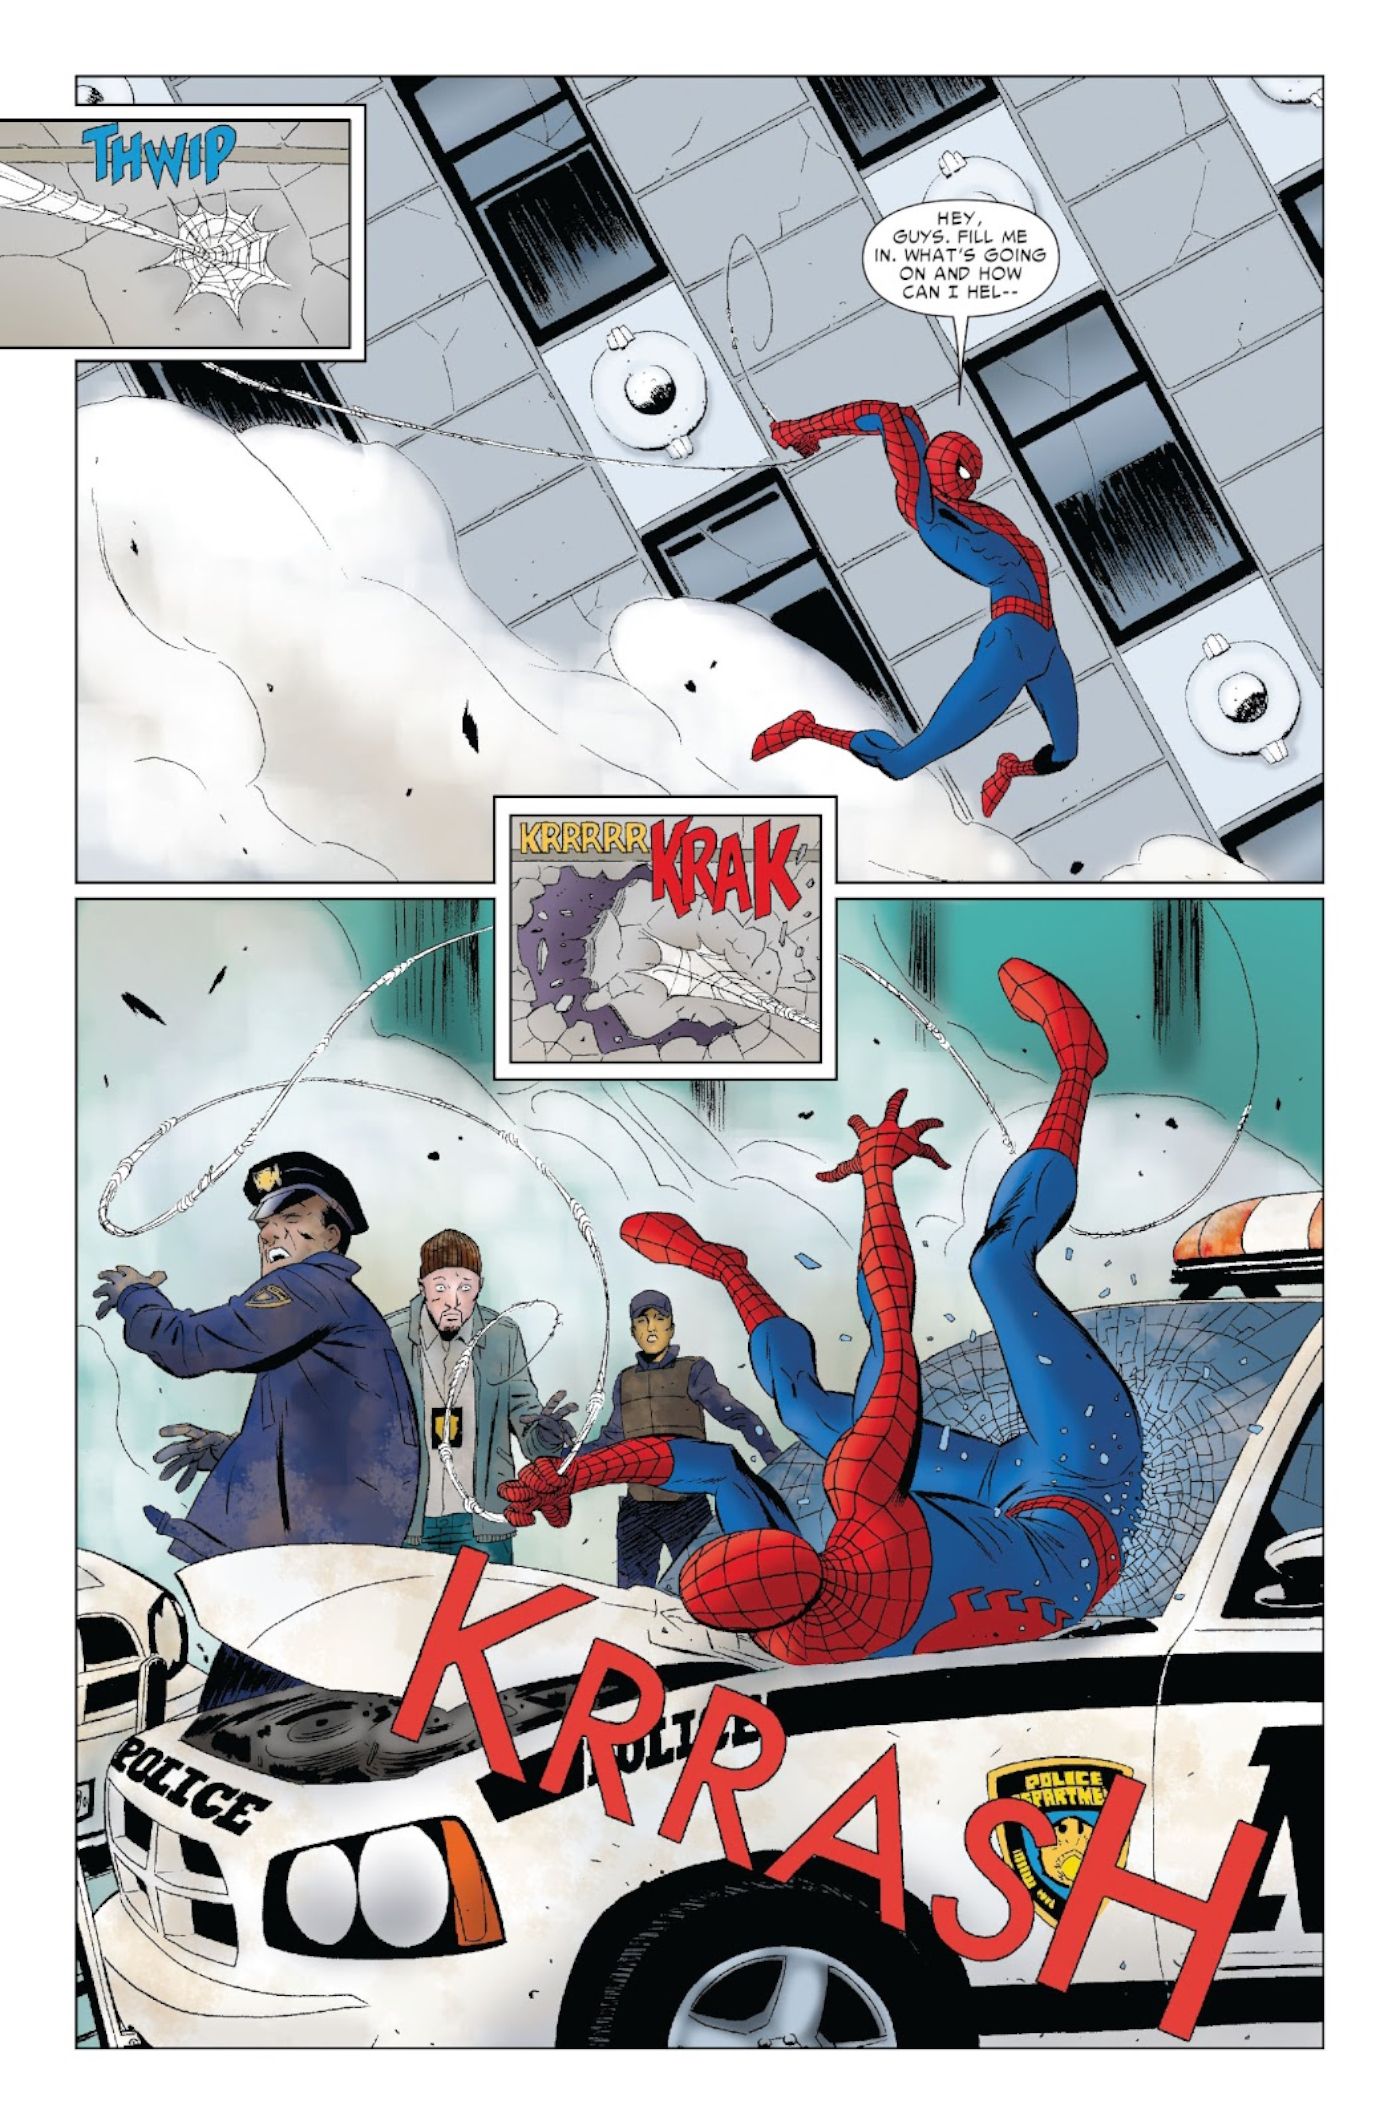 Amazing Spider-Man #656, Peter needs his spider-sense to be able to websling